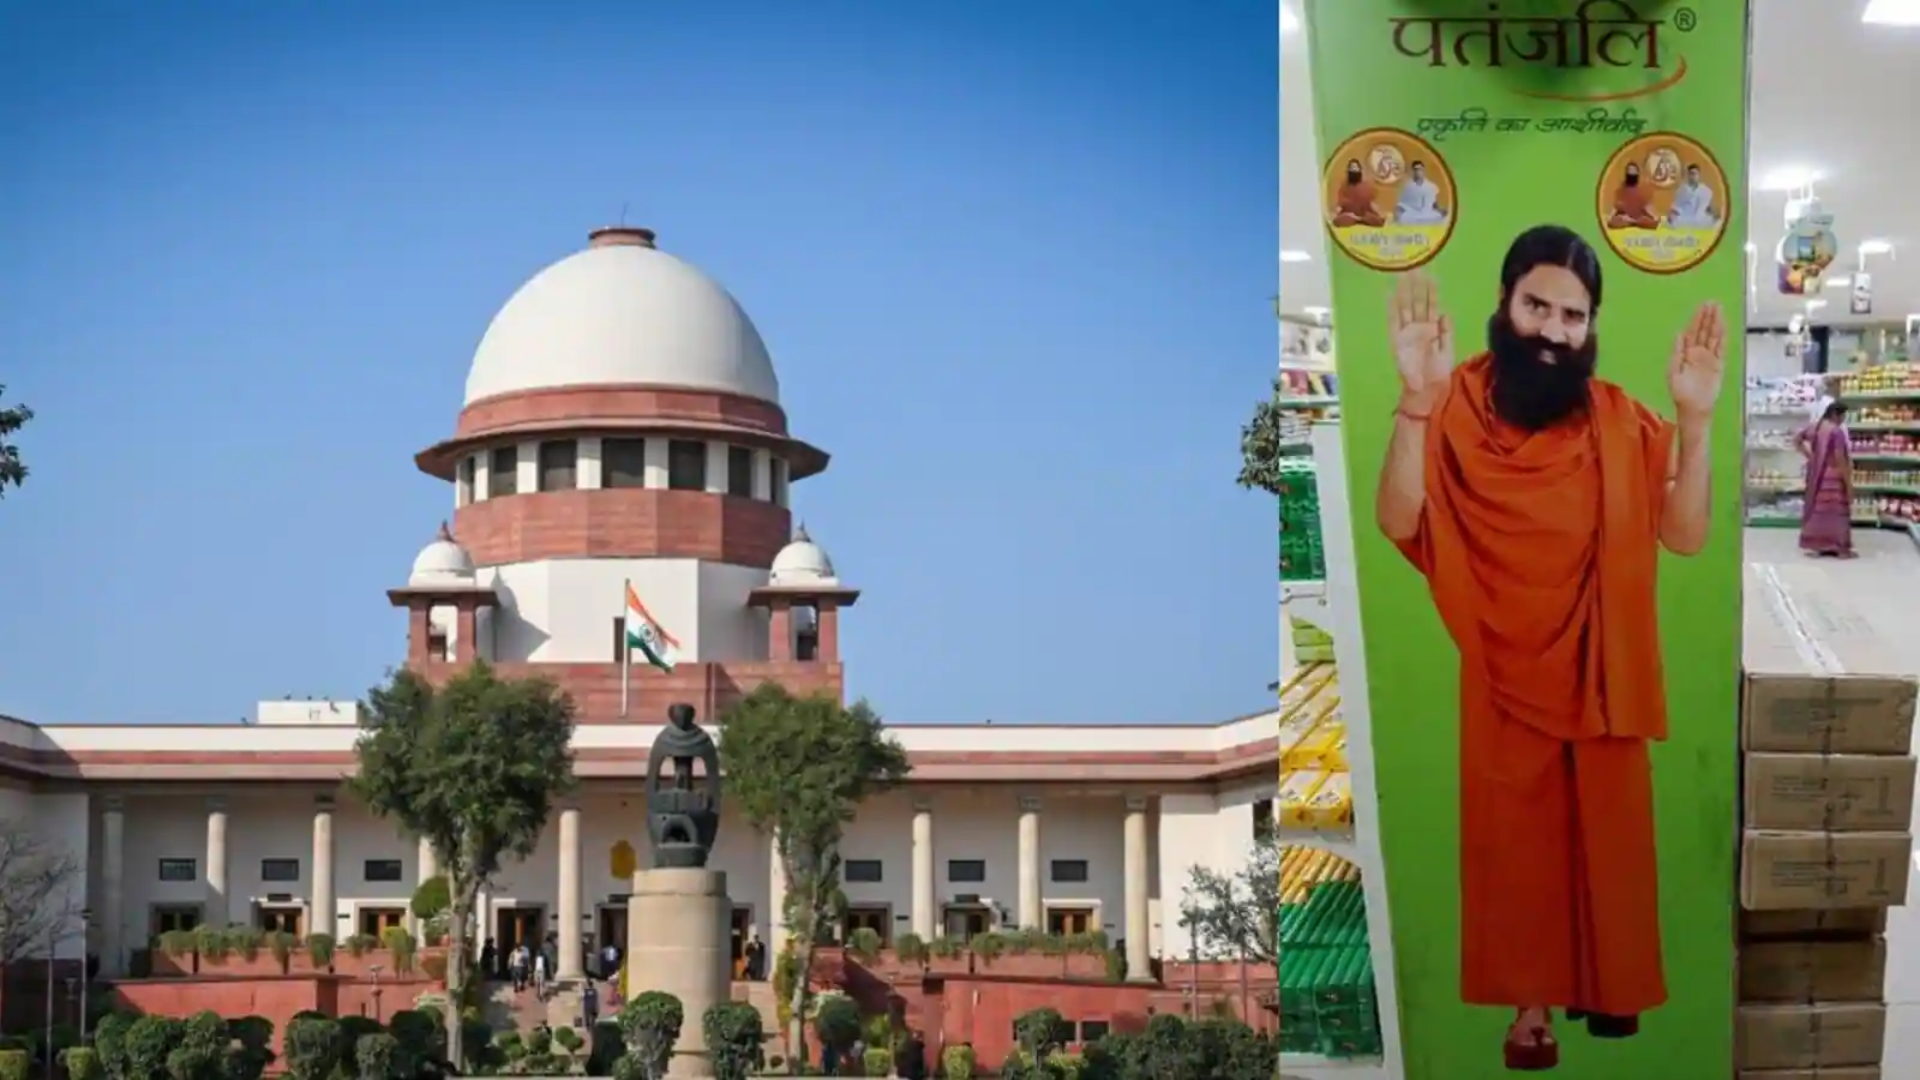 Patanjali Case : Center Defense Ayurvedic Ads To Stay, Technical Board Backing Cited